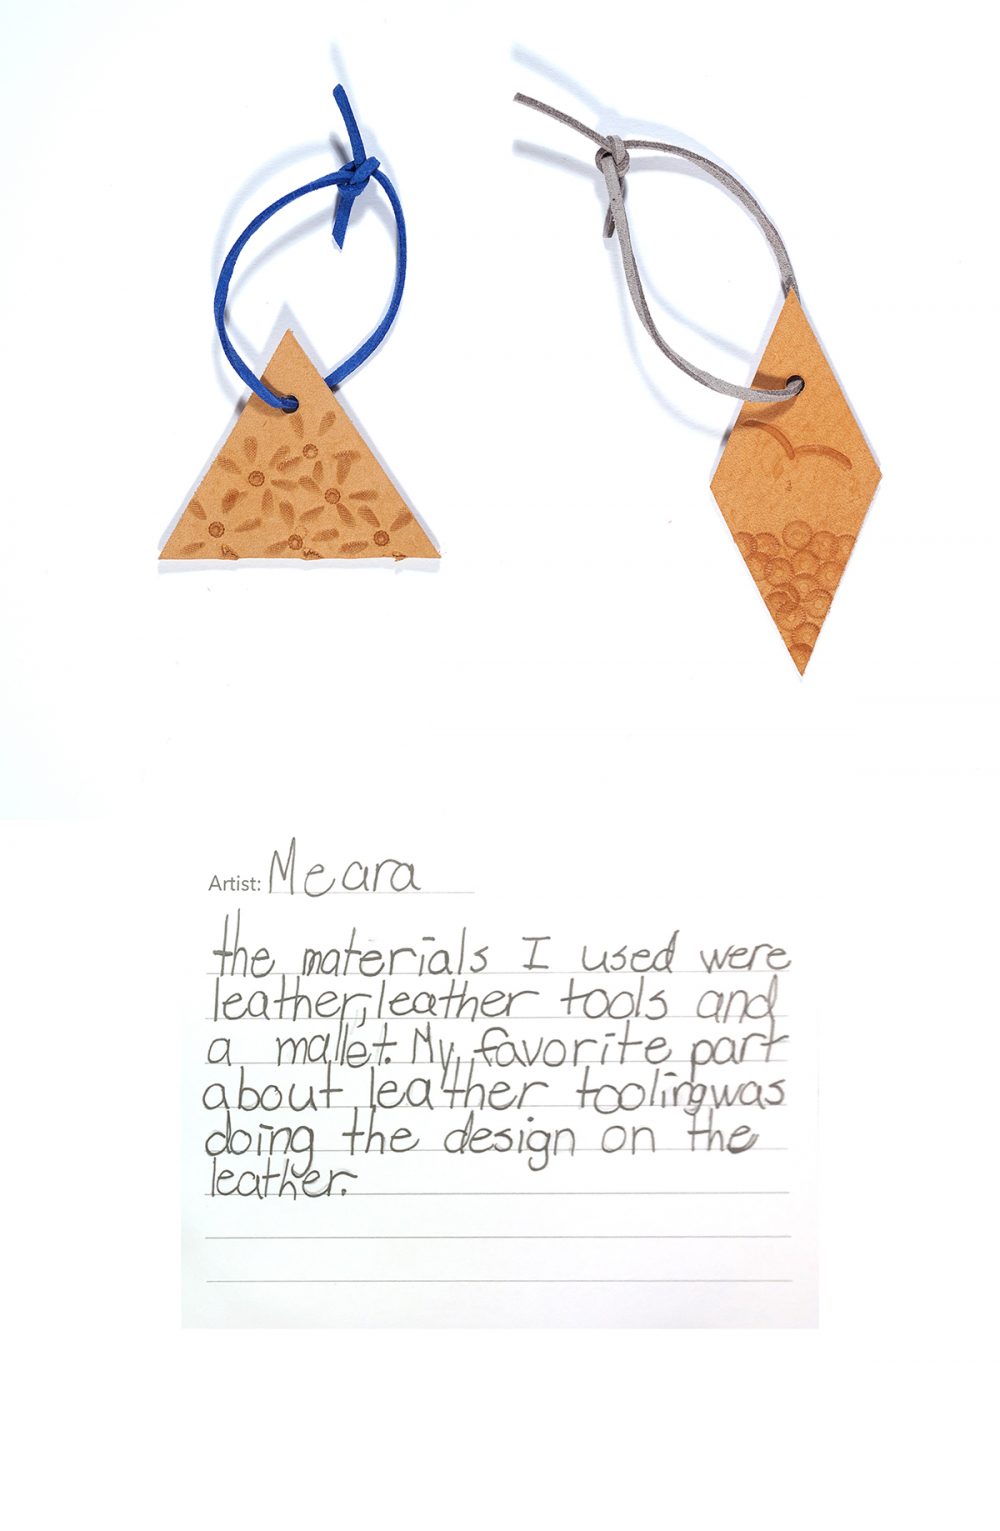 Two leather shapes, one a triangle and the other a diamond, are stamped with patterns. Both are punched with a single hole that has been treaded with a leather lace tied in a loop at the top. Below handwritten text reads "Artist: Meara", "The materials I used were leather, leather tools and a mallet. My favourite part about leather tooling was doing the design on the leather."